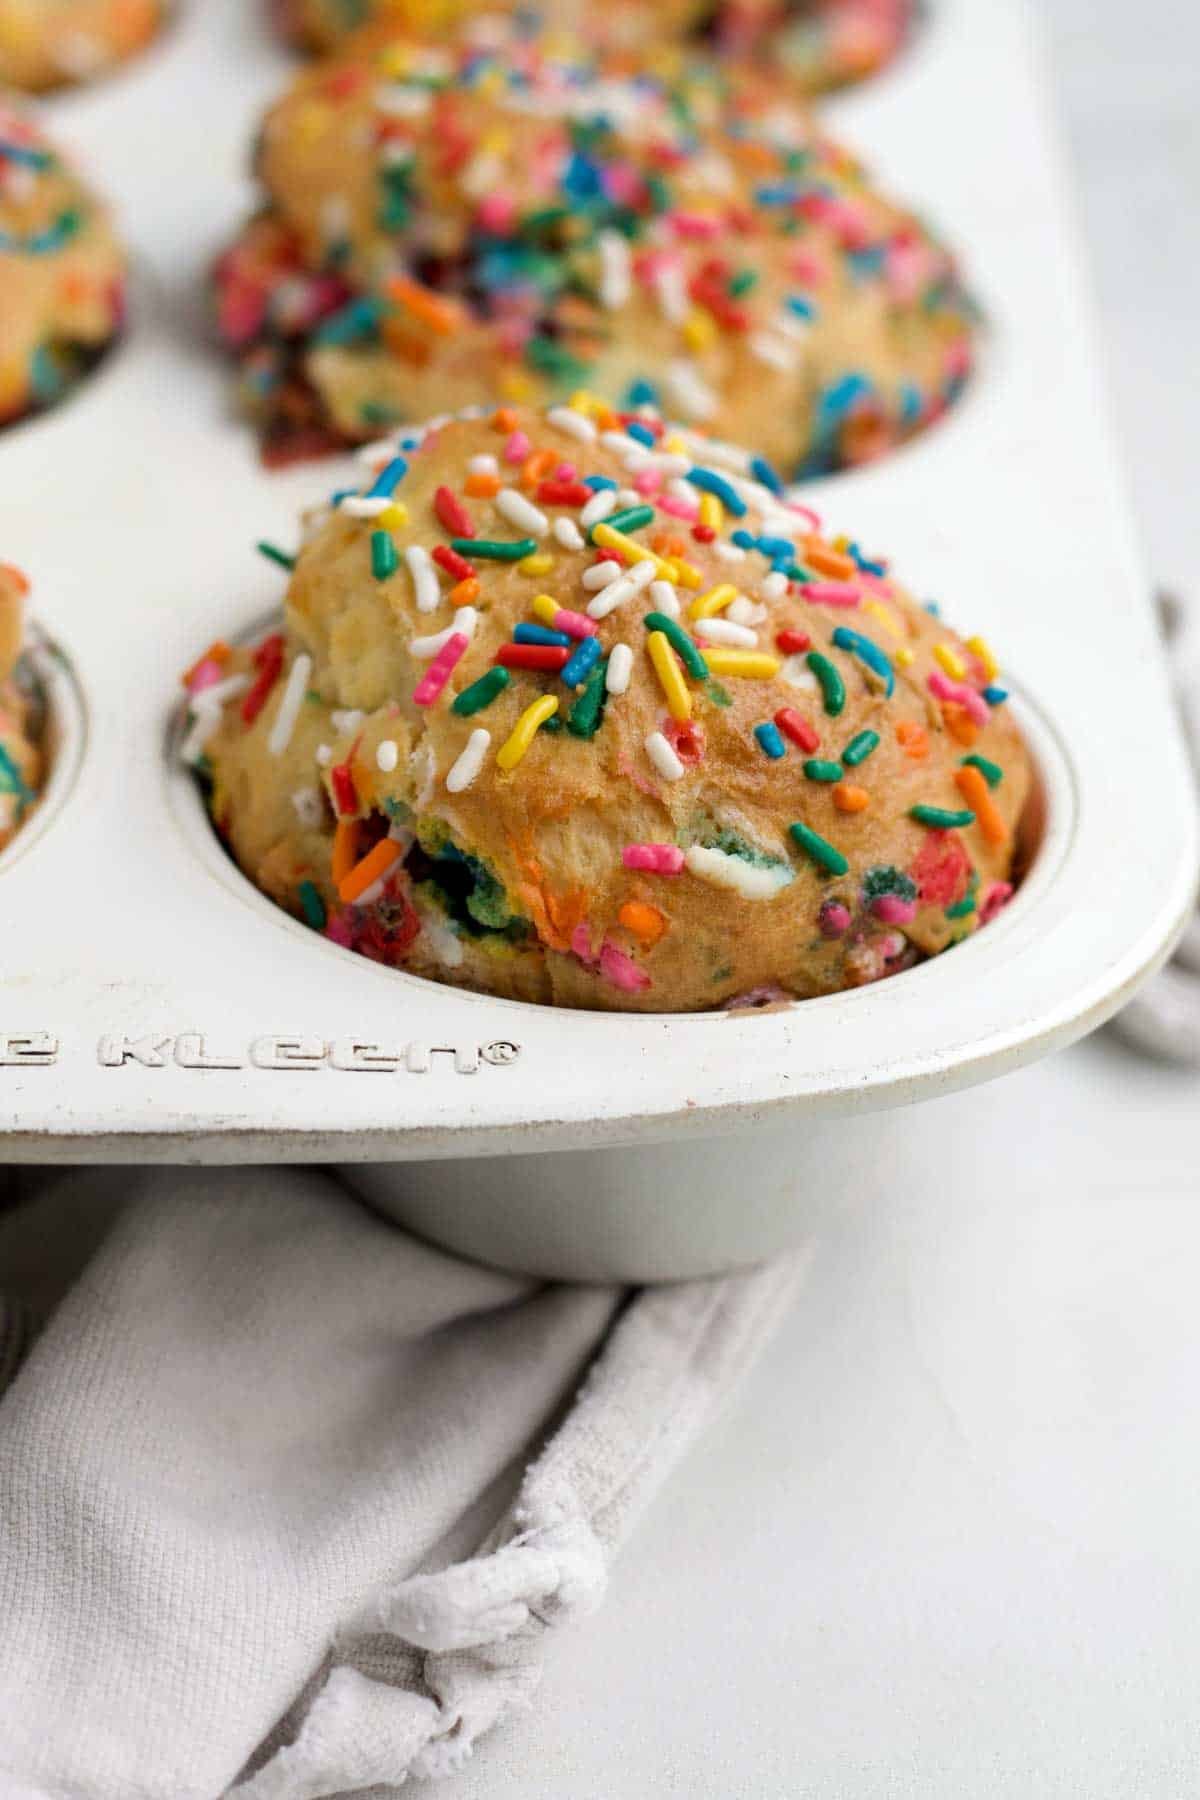 The high golden brown dome of the Birthday Muffins with rainbow sprinkles.